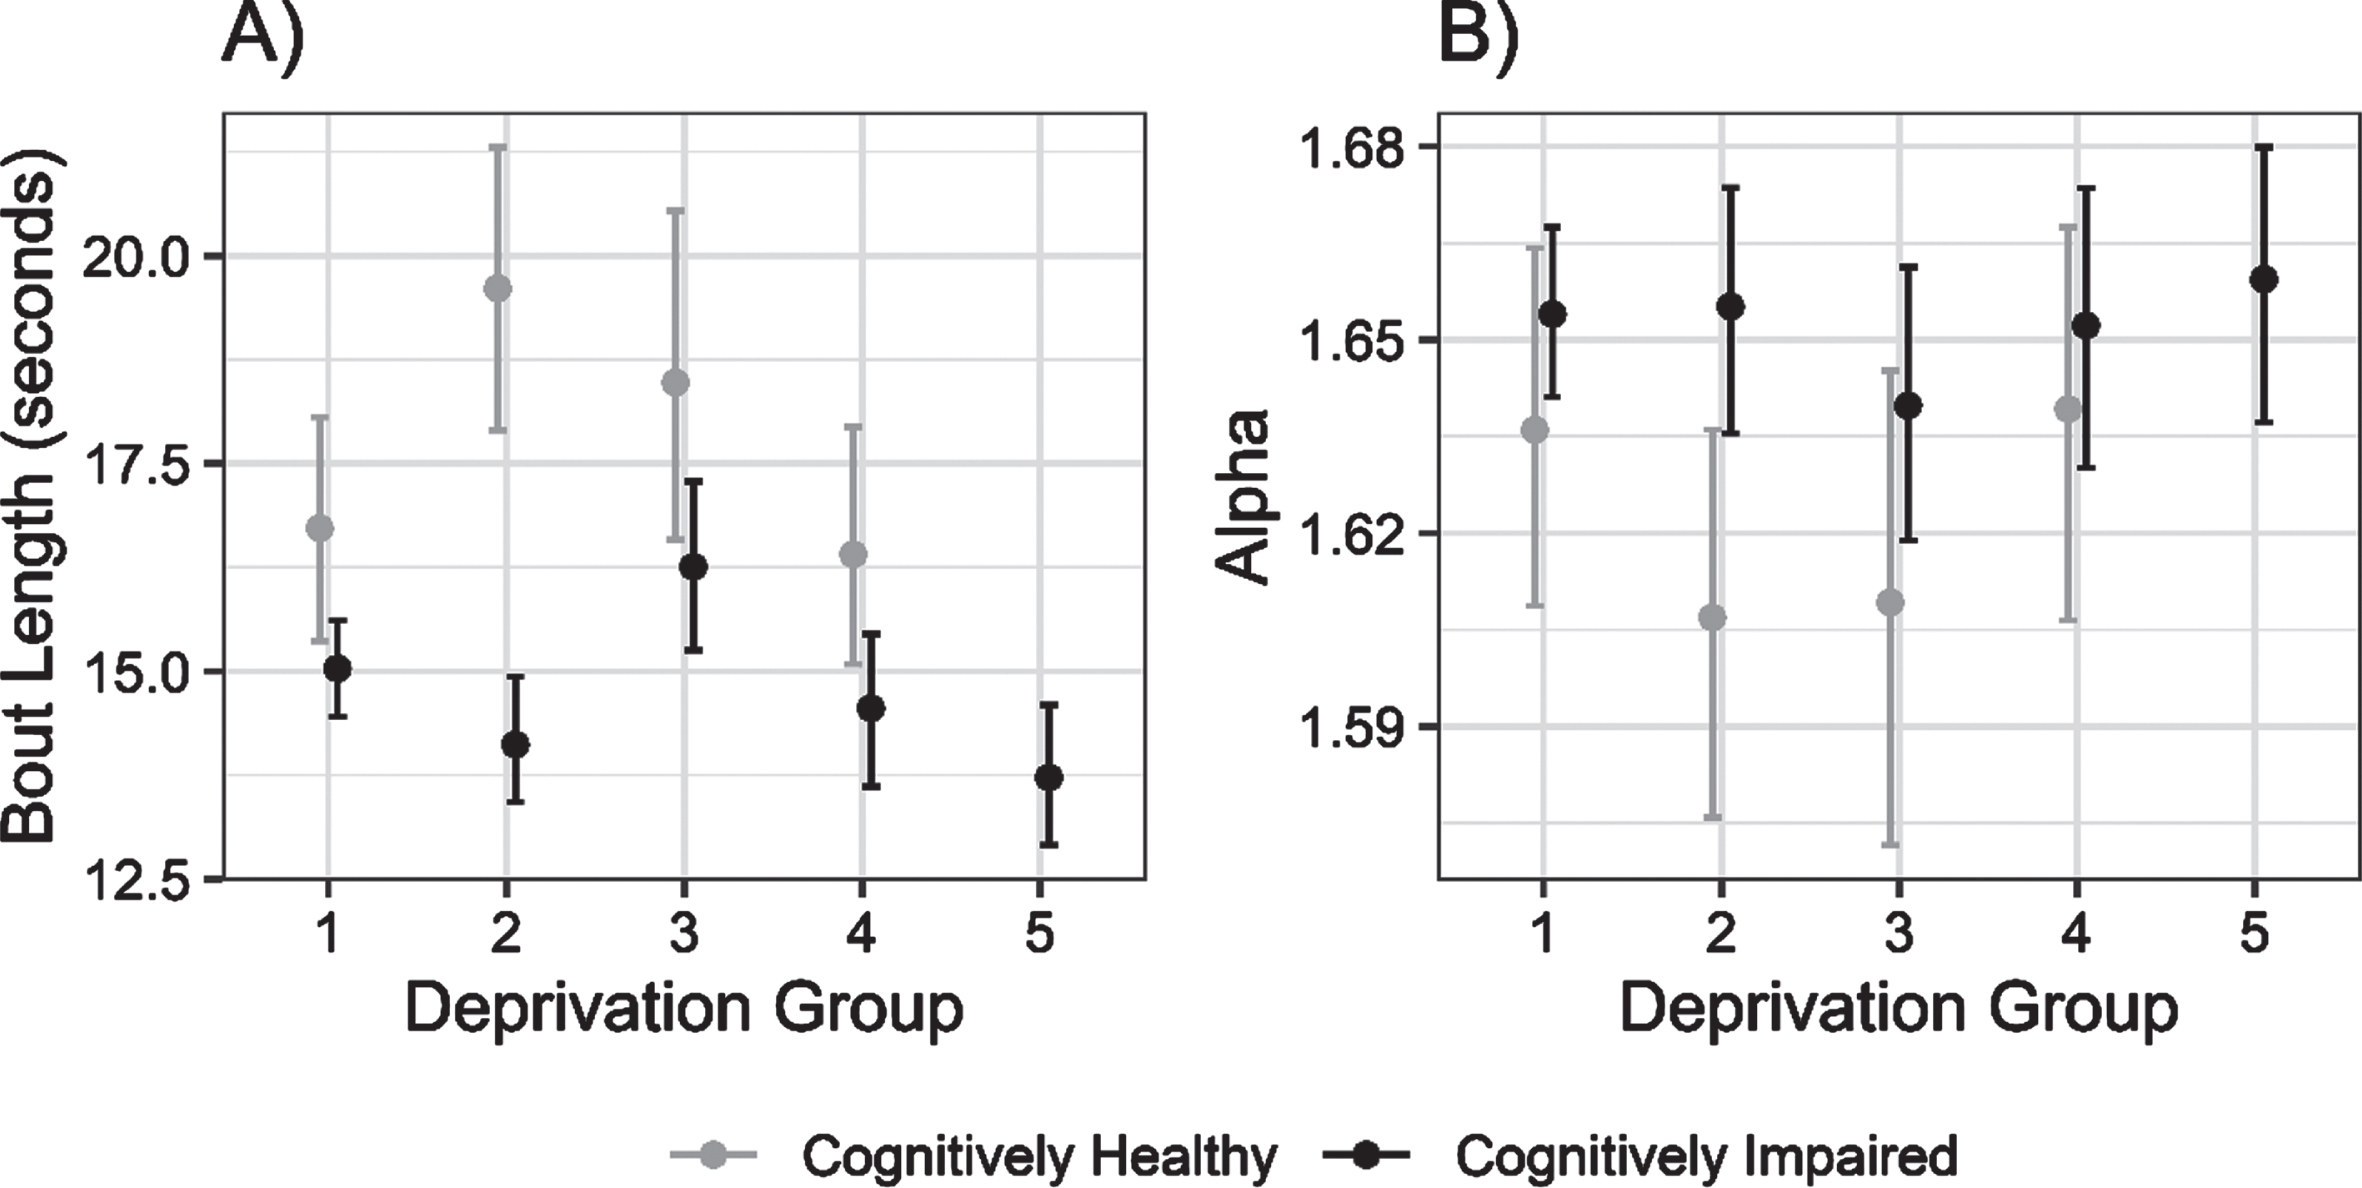 Mean (±95% CI) bout length and alpha (i.e., ratio of short to long walking bouts per individual) for cognitively unimpaired and cognitively impaired groups, across deprivation strata from least (1) to most (5) deprived areas.